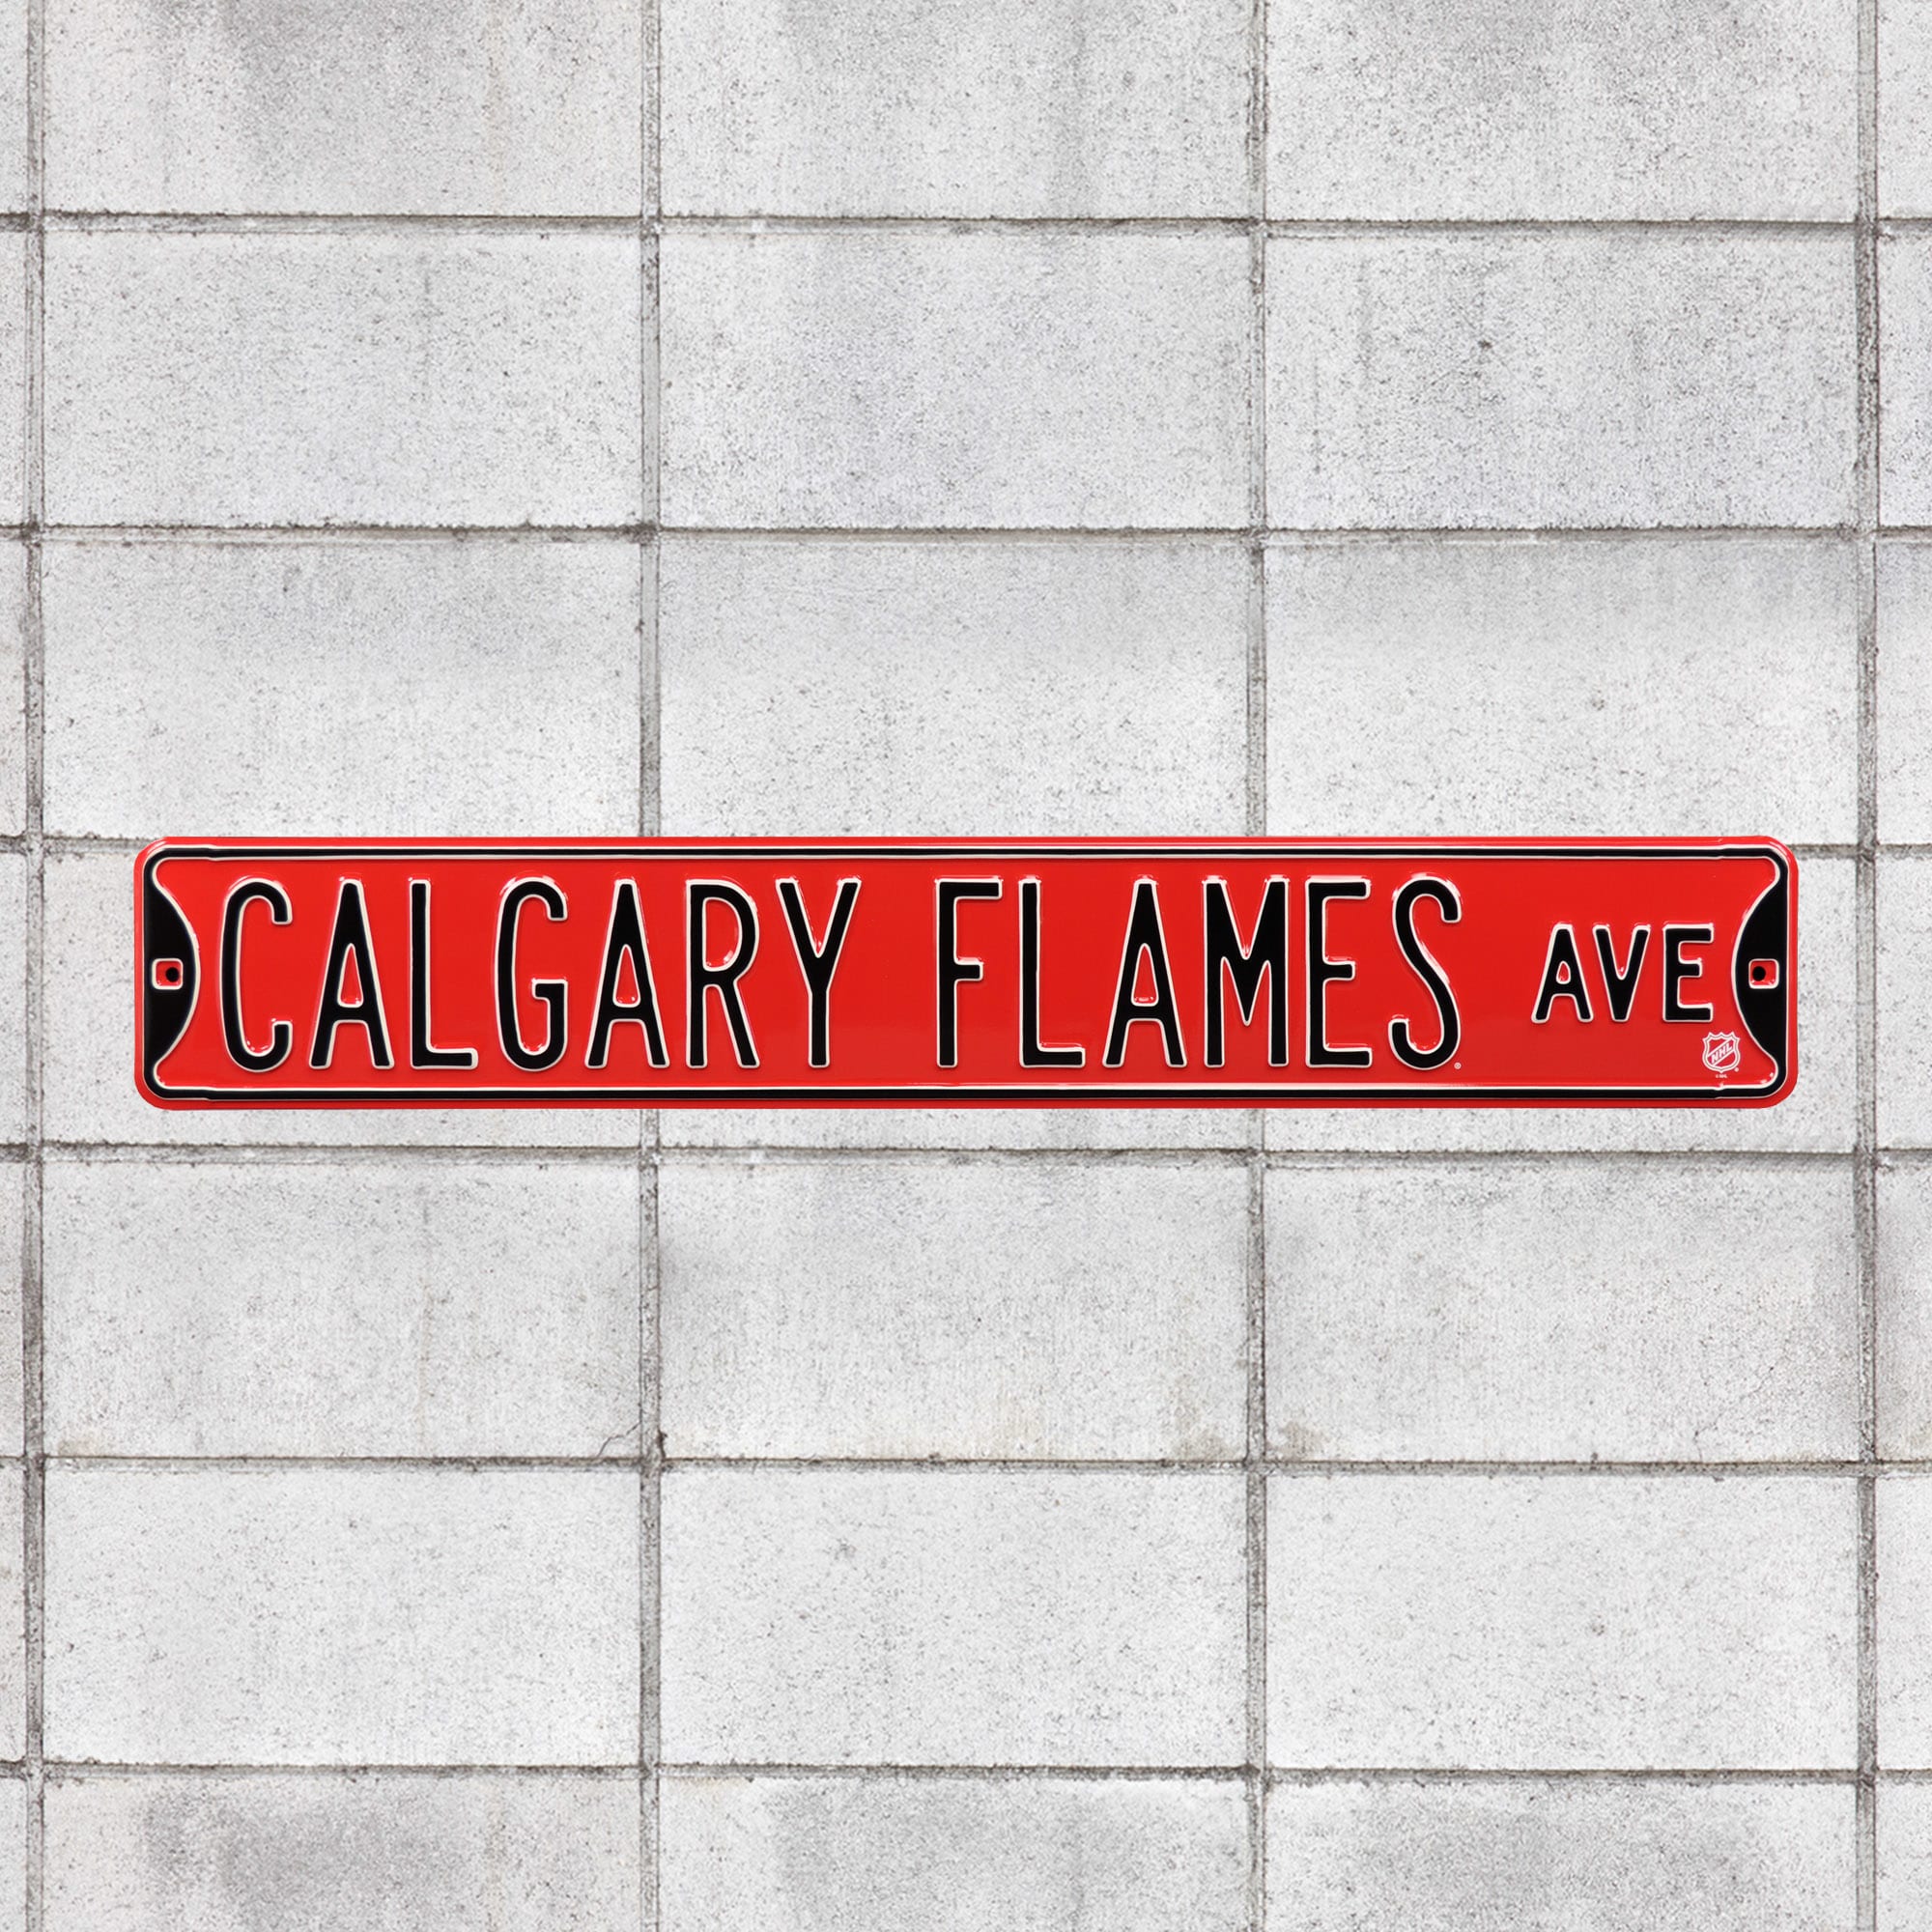 Calgary Flames: Calgary Flames Avenue - Officially Licensed NHL Metal Street Sign 36.0"W x 6.0"H by Fathead | 100% Steel